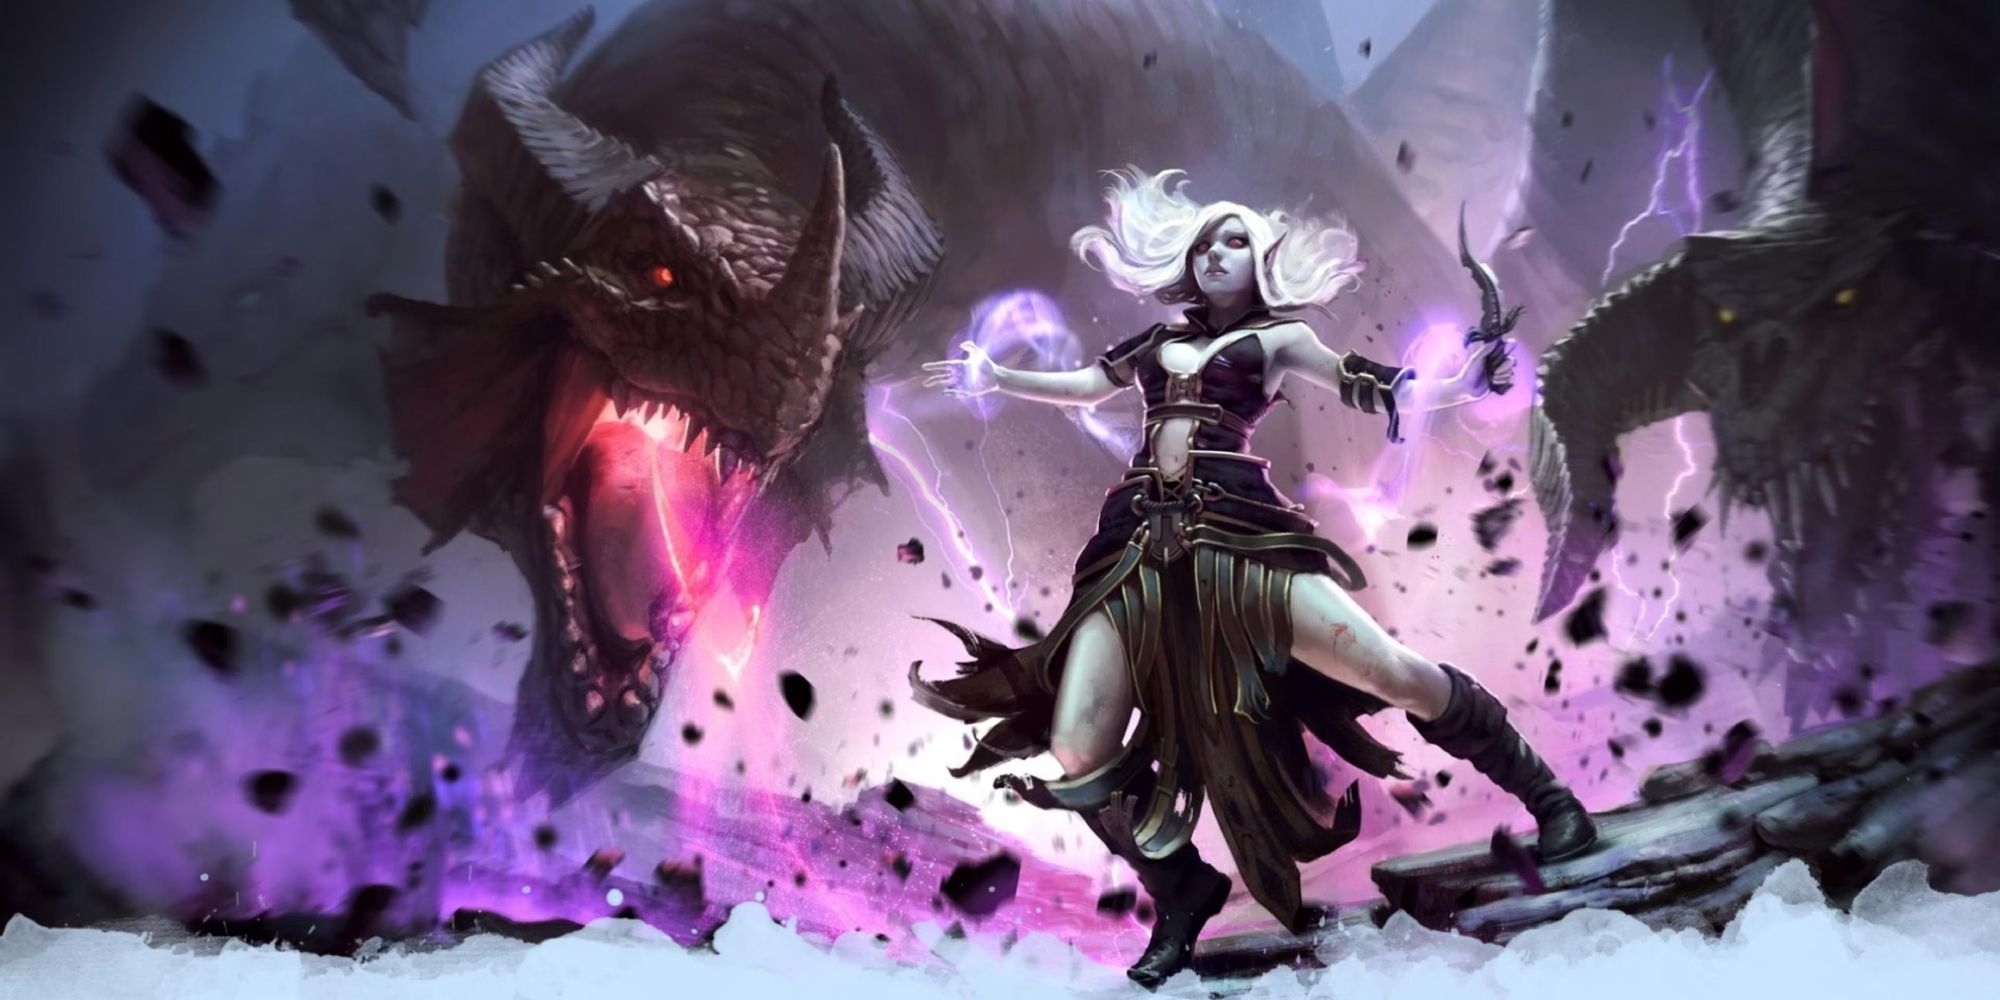 A warlock channels an earth-shaking spell as a dragon looms ominously in the background